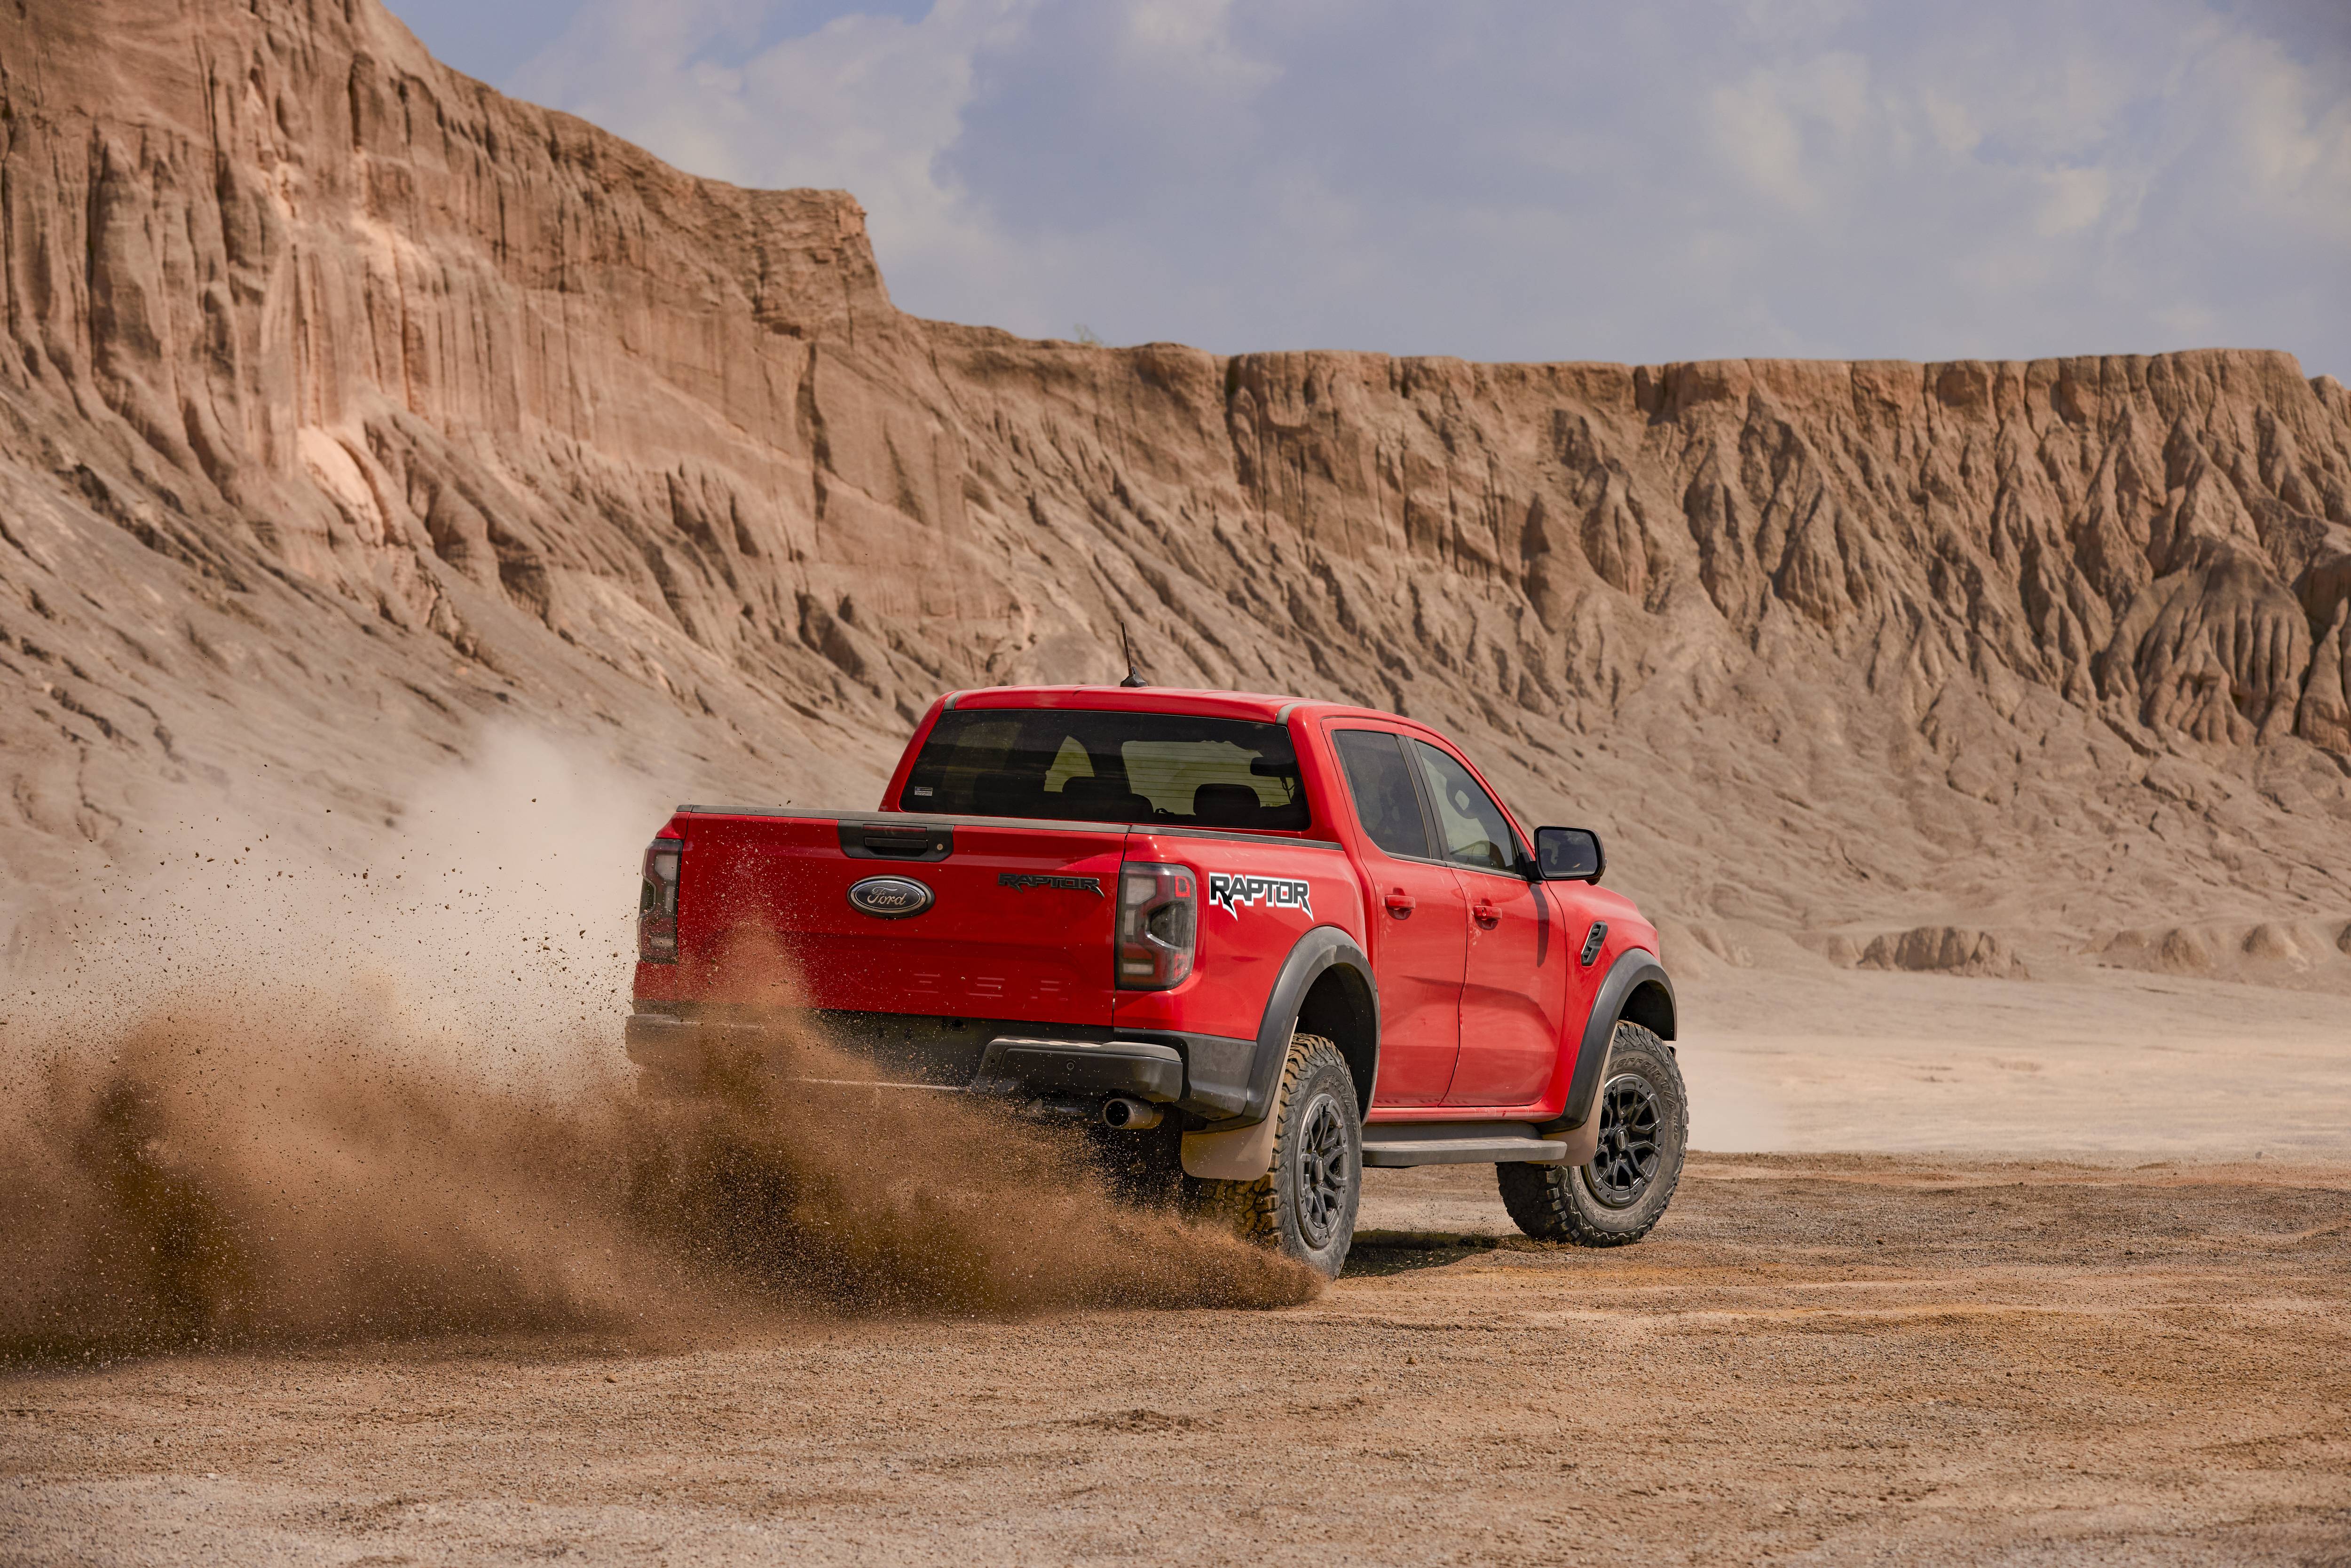 Red Ford Ranger Raptor kicking up dust driving off in clay like desert